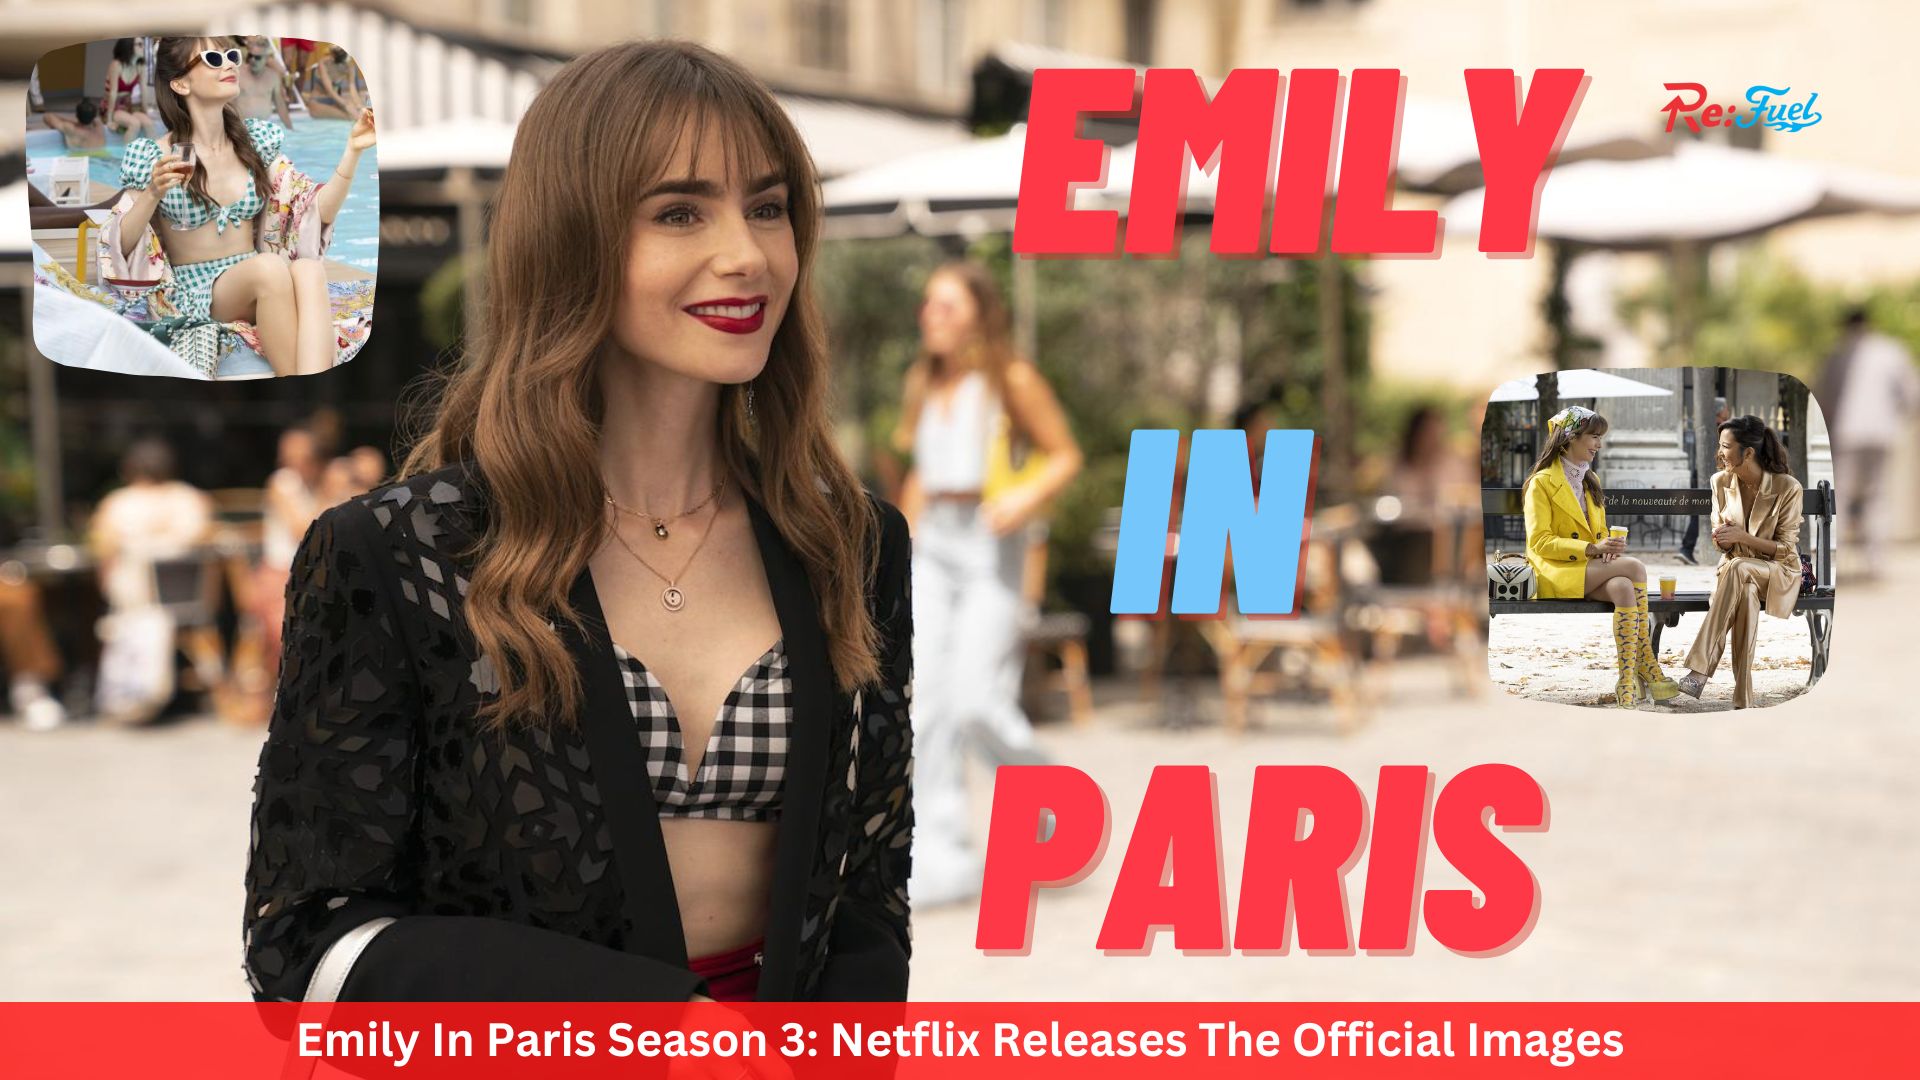 Emily In Paris Season 3: Netflix Releases The Official Images